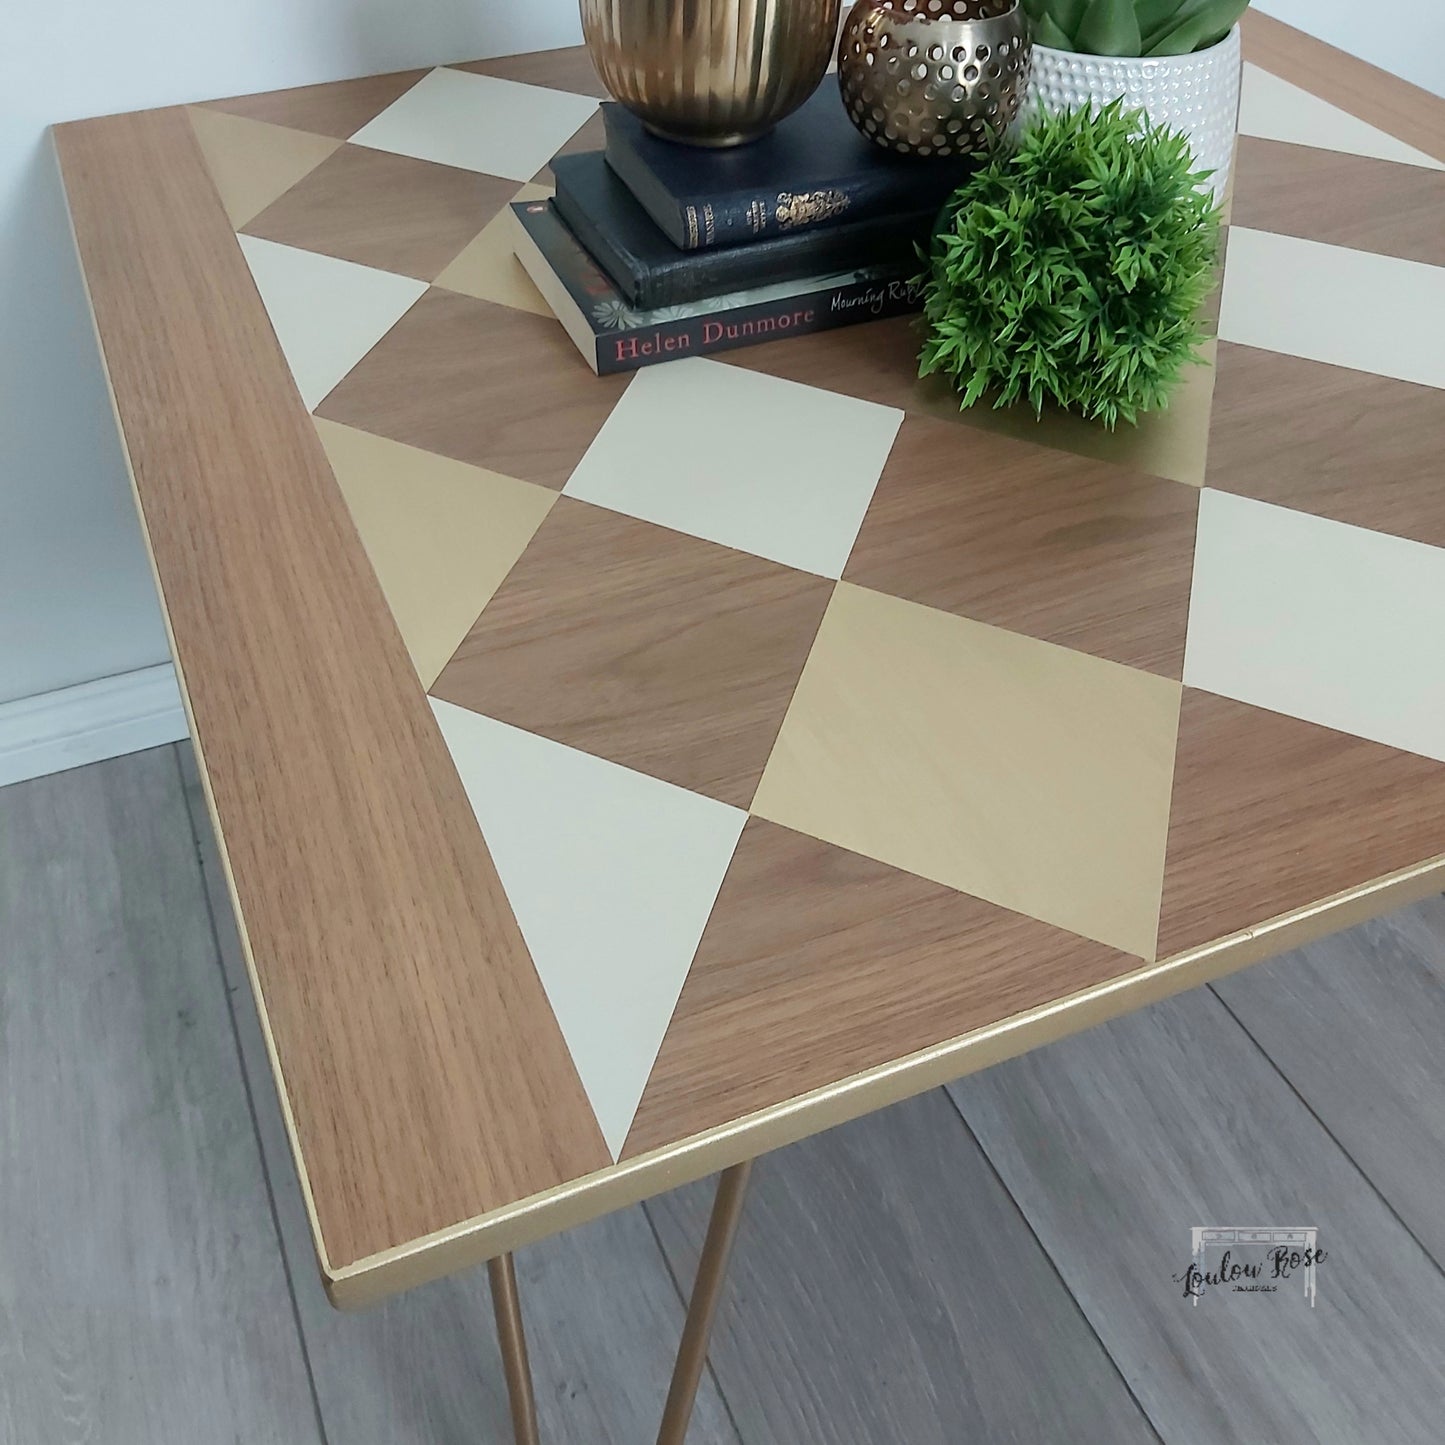 Coffee Table, Side Table with Hairpin Legs and a Geometric Design in Gold and Cream